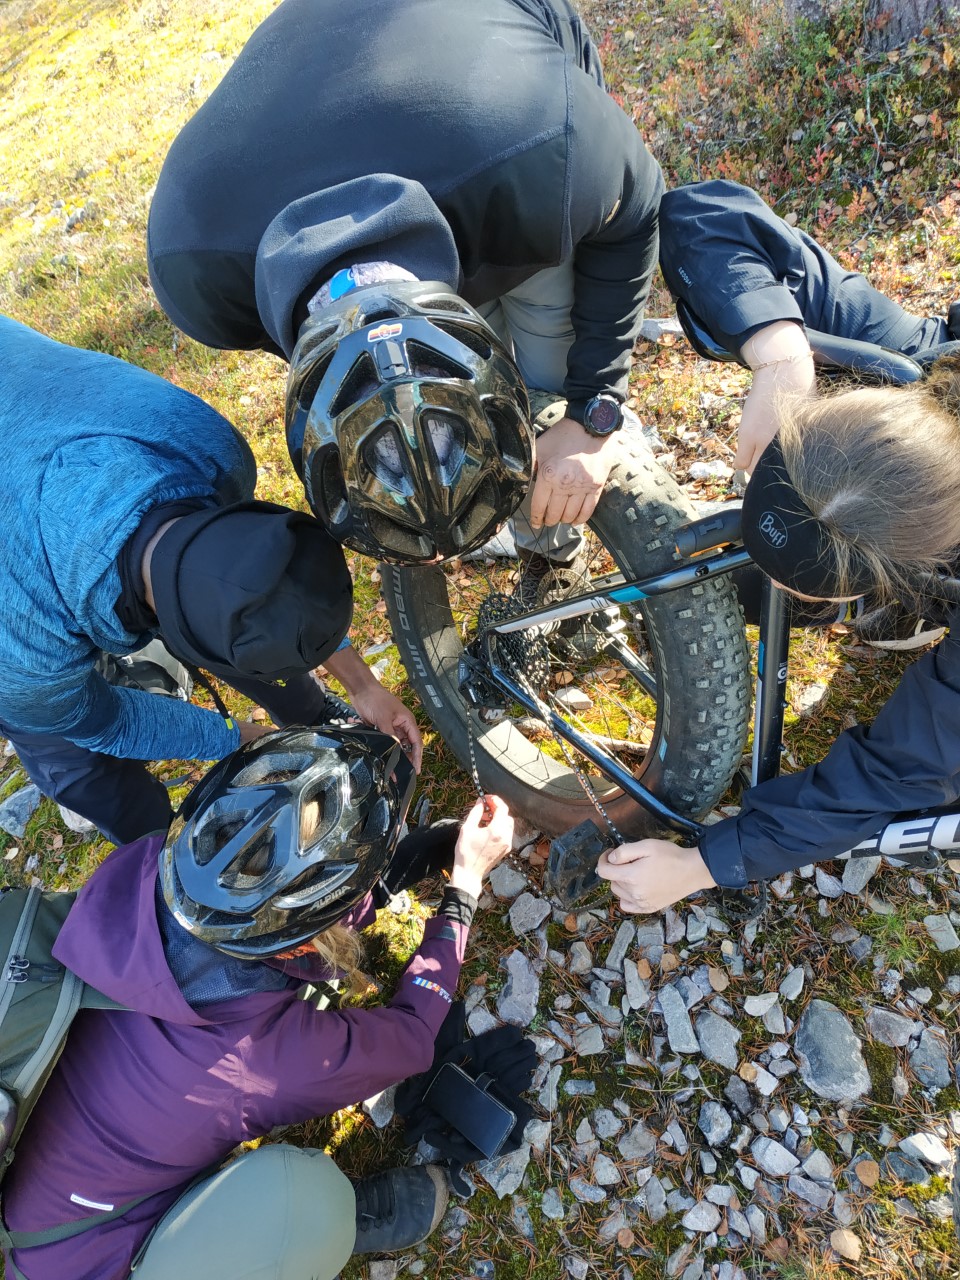 A group of students working together fixing a bicycle tire